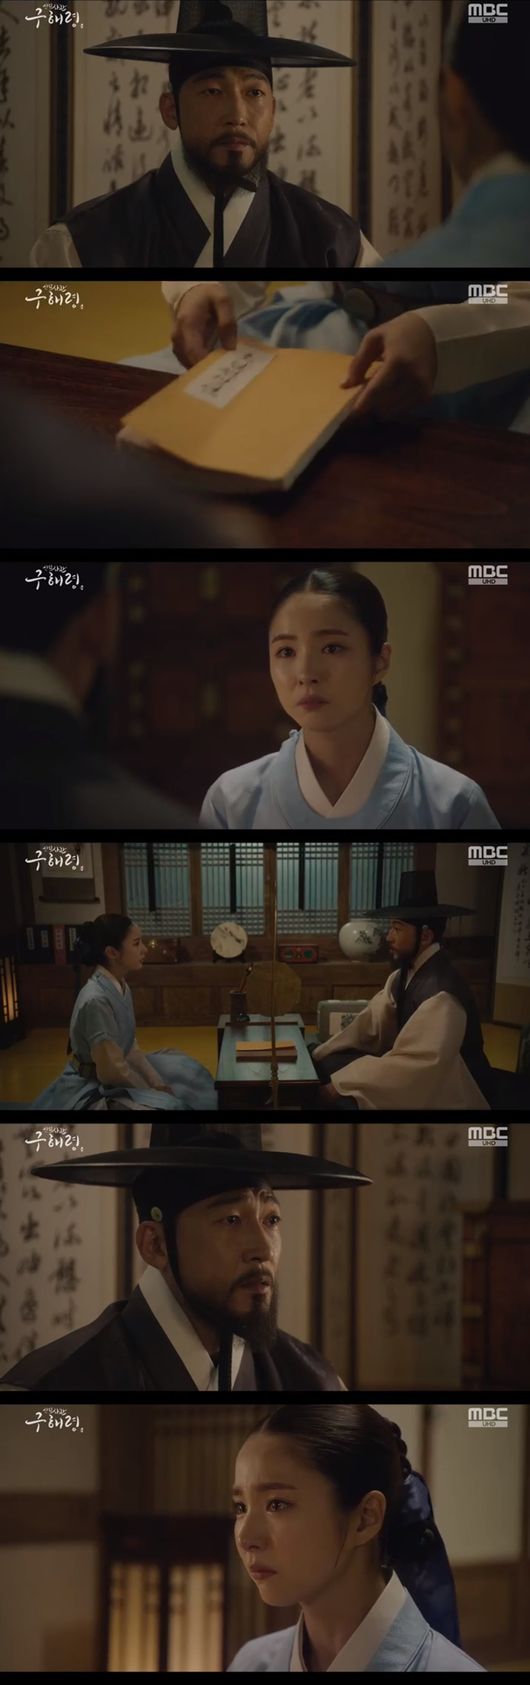 Shin Se-kyung read the Hodam Teachers Exhibition, which remained a gold medal in history.In the MBC drama New Entrance Rookie Historian Goo Hae-ryung broadcasted on the 19th, Rookie Historian Goo Hae-ryung read the book Hodam Seonjeon which was a gold book and began to dig into the truth of Seoraewon.On this day, the palace began to turn around with the purposeful sprinkle of someone.Rookie Historian Goo Hae-ryung hunched that the book was the one that Irim was looking for and hid it.Those who put the money in their mouths will tie it to the mold and pull their tongues out, said Lee Tae-tae (Kim Min-sang); Min Ik-pyeong (Choi Deok-moon), The real bad people are those who spread the gold.The King already knows the criminal, does he not?The person who brought the money to the palace should be treated and punished as a sinner in the band. Please do this calmly, Min said.Min Ik-pyeong assumed that the person who spread the exhibition of Hodam to the palace was Lim (Kim Yeo-jin).Rookie Historian Goo Hae-ryung read the Hodam teachers exhibition and learned the truth of Seoraewon made by Hodam and Youngan.Seoraewon was a place where everyone studied together and learned medicine without discrimination between identity and gender.However, the people of the world saw Seoraewon with bad eyes, and eventually Seoraewon was lost in the hands of Min-pyeong and Itae.Rookie Historian Goo Hae-ryung said, No matter how you think, there is only one person who knows more about Seoraewon.Is this the book brother written? Where is the truth and how far is the novel?If Youngan is my father and Hodam is a lord, the people who framed these two people are now the present. But Koo Jae-kyung (Fairy Hwan) told Rookie Historian Goo Hae-ryung: You get your hands off this.Rookie Historian Goo Hae-ryung said, Why did not you tell me? I did not know that, and I have been in and out every day.What are you trying to do? he asked.Ill find out about the ship tomorrow morning, and go out for a while, said Koo Jae-kyung, but Rookie Historian Goo Hae-ryung, tearfully, refused.Rookie Historian Goo Hae-ryung said: Twenty years ago that morning my father greeted me as usual and never returned.I can not lose even my brother. So, all you can do is survive. That is my promise to the teacher.Protecting you from them. So do not get closer to this anymore. Eventually Rookie Historian Goo Hae-ryung decided to dig the truth alone.